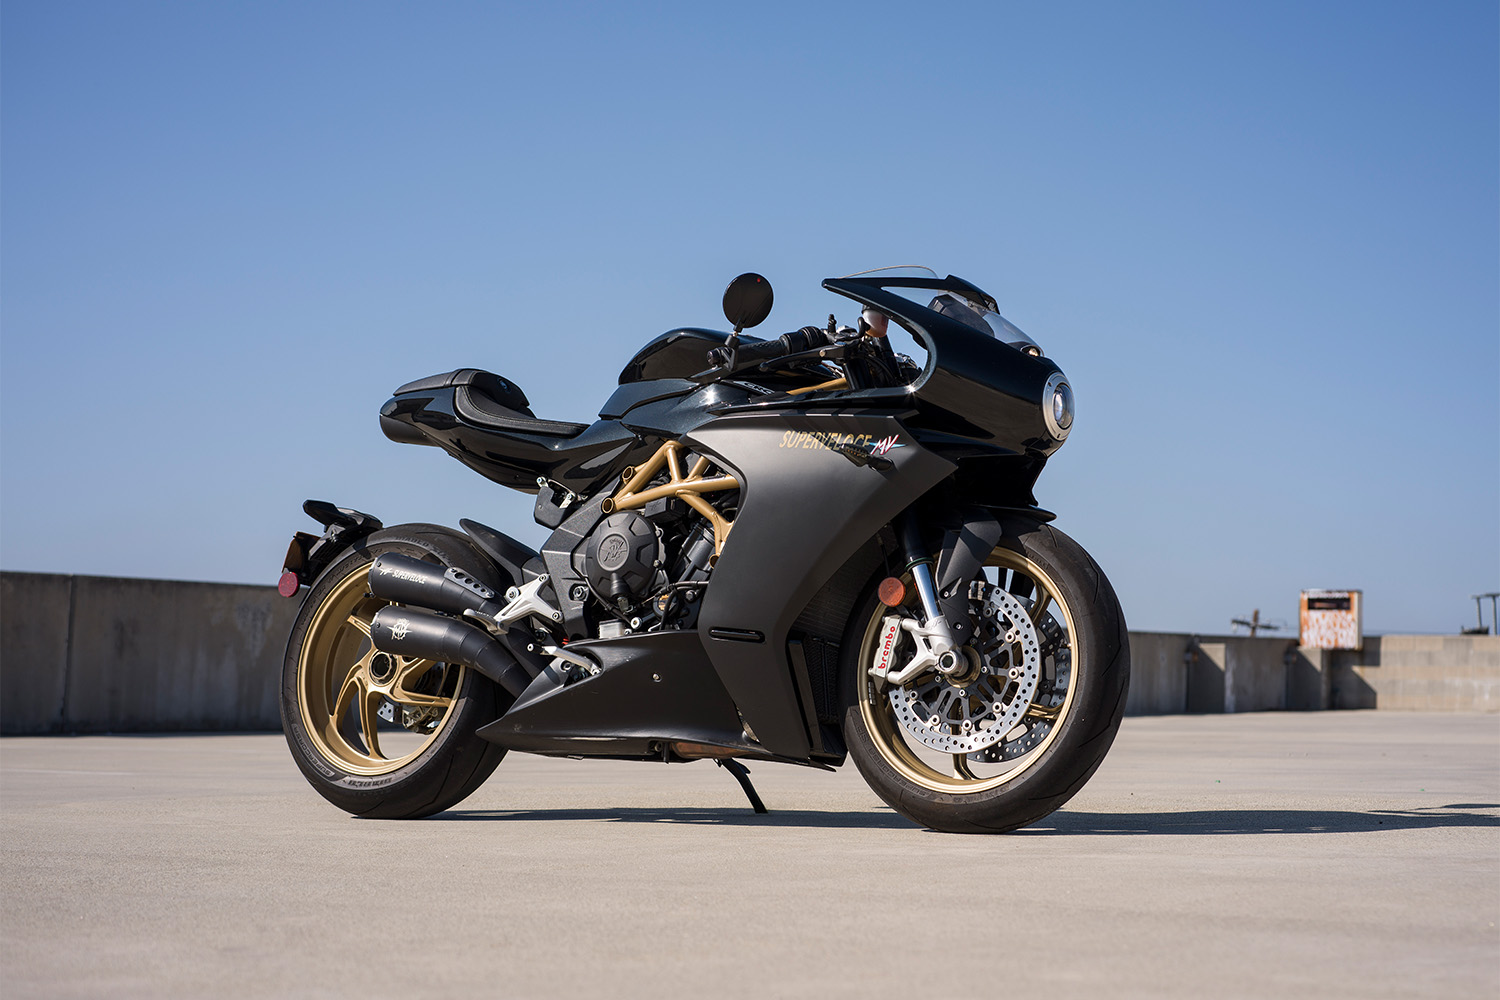 Review: The MV Agusta Superveloce 800, Style Meets Performance - InsideHook